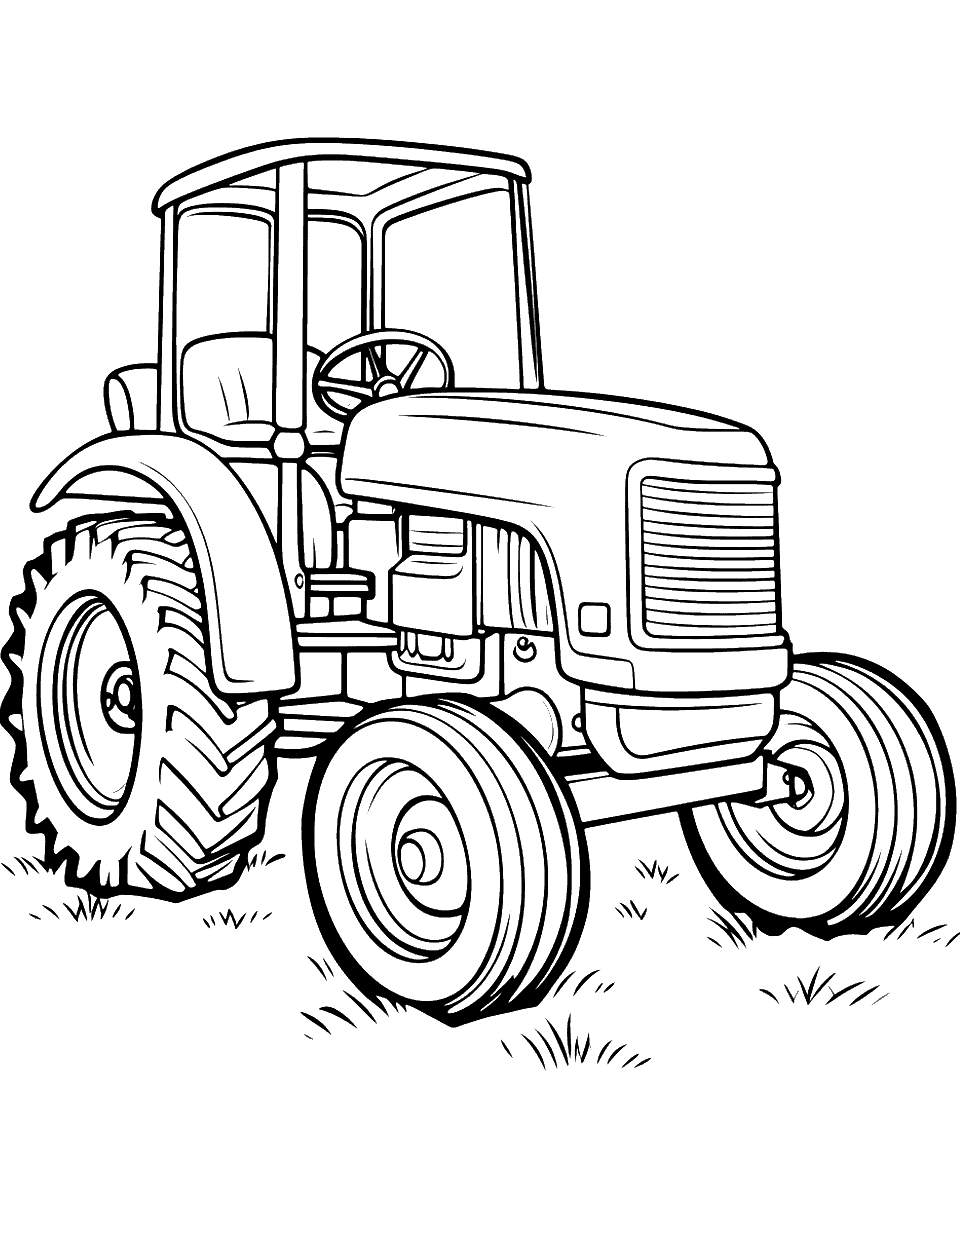 Simple Tractor for Coloring Fun Page - A basic, easy-to-color tractor, perfect for young artists.